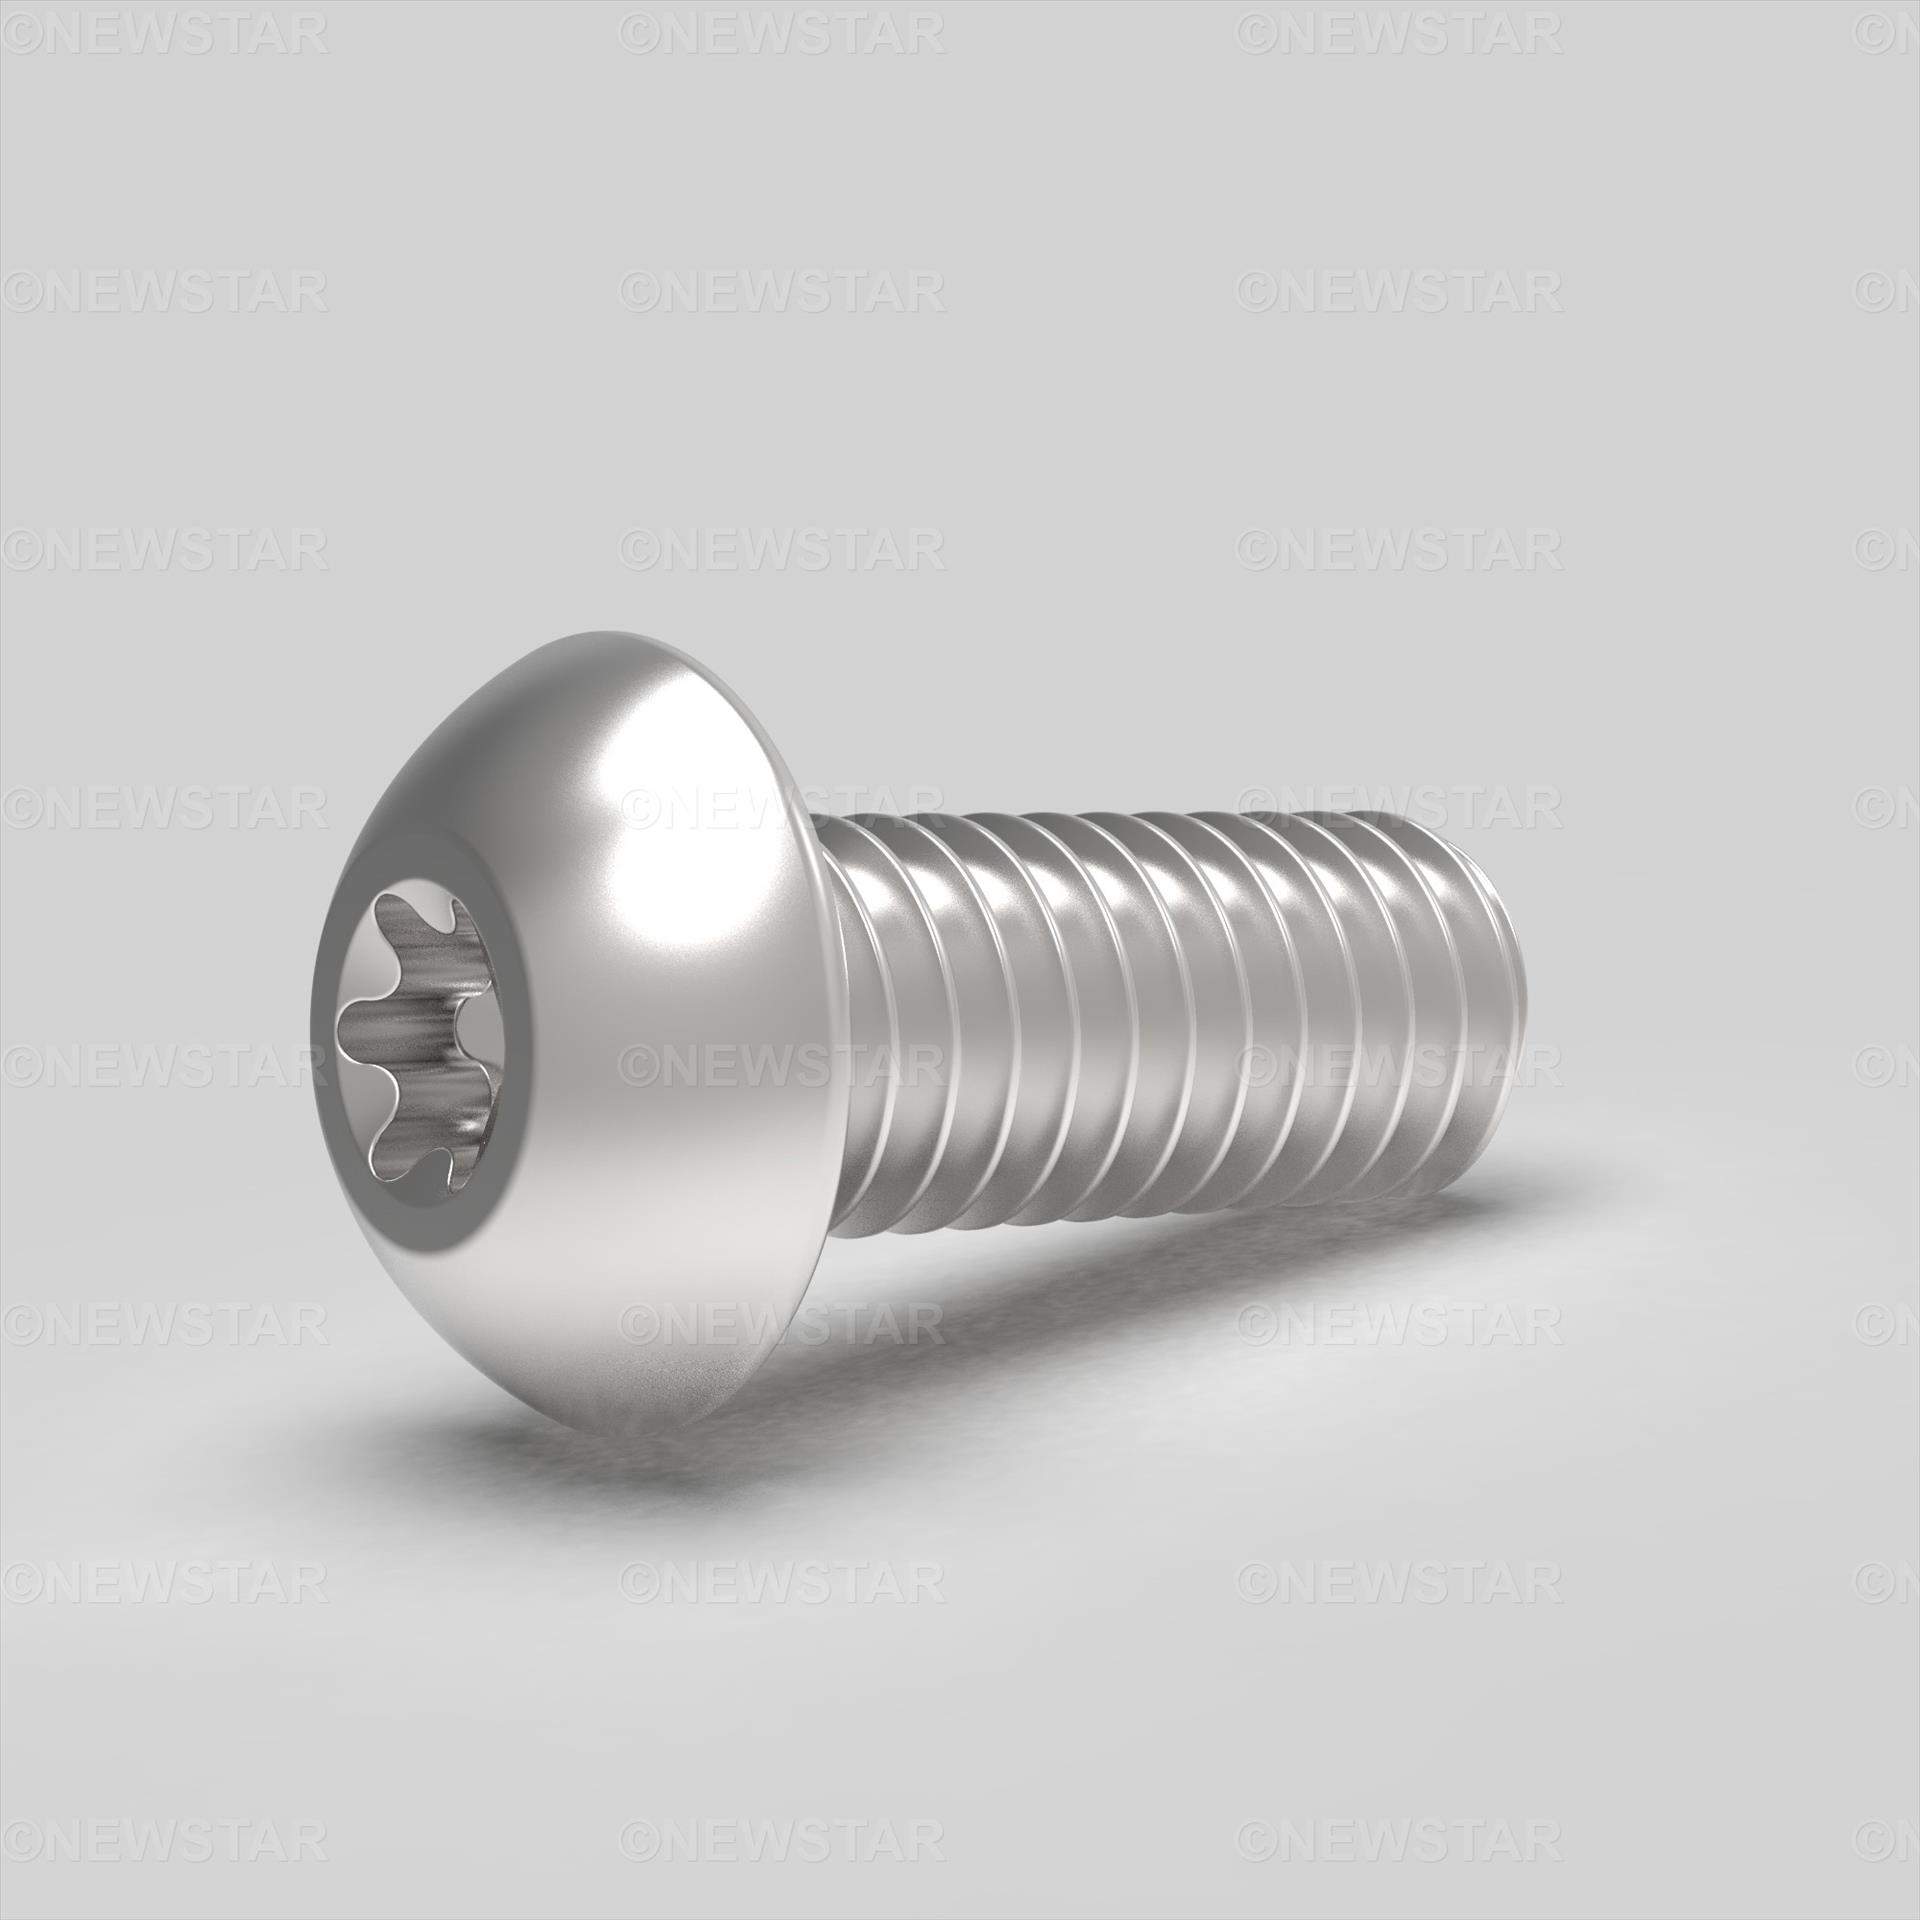 M2.5 X 8 Socket Button Sixlobe ISO 7380-1 A2 Stainless Steel